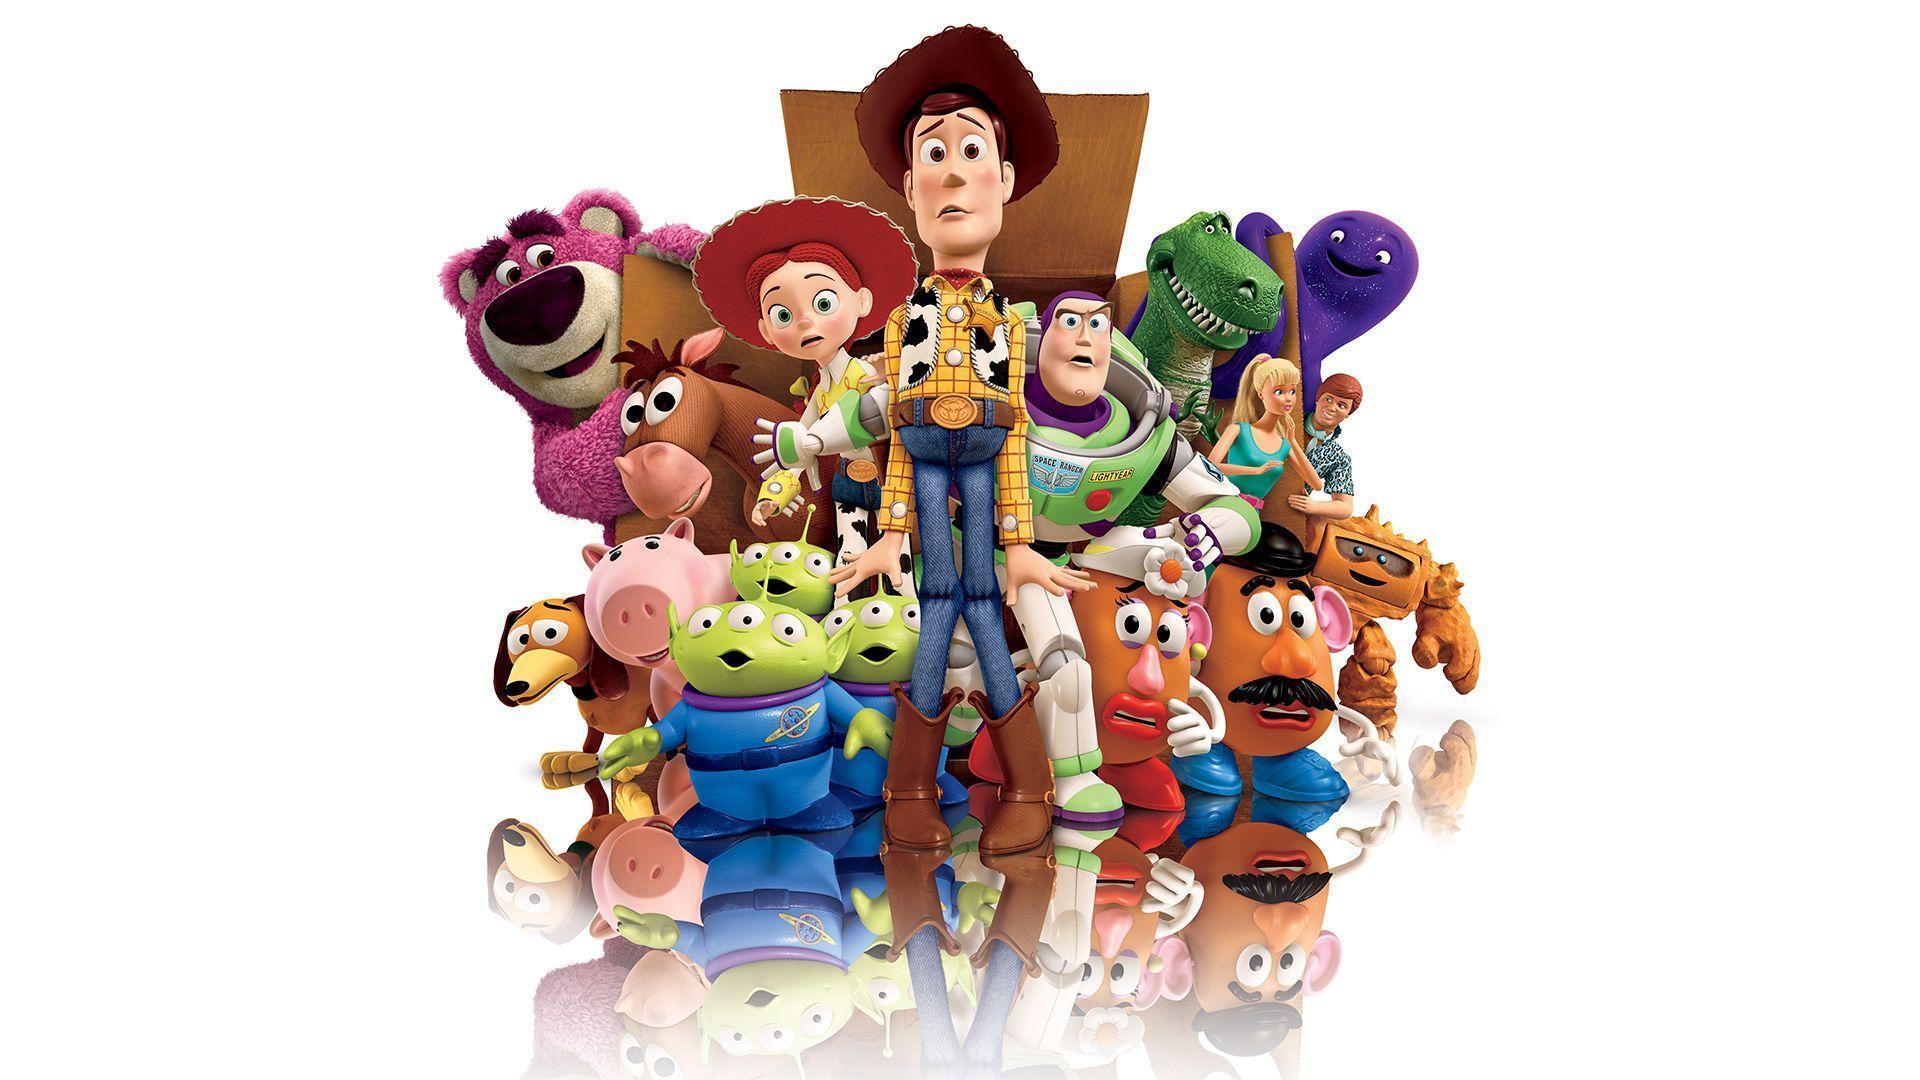 Quality Toy Story Wallpaper, Cartoons